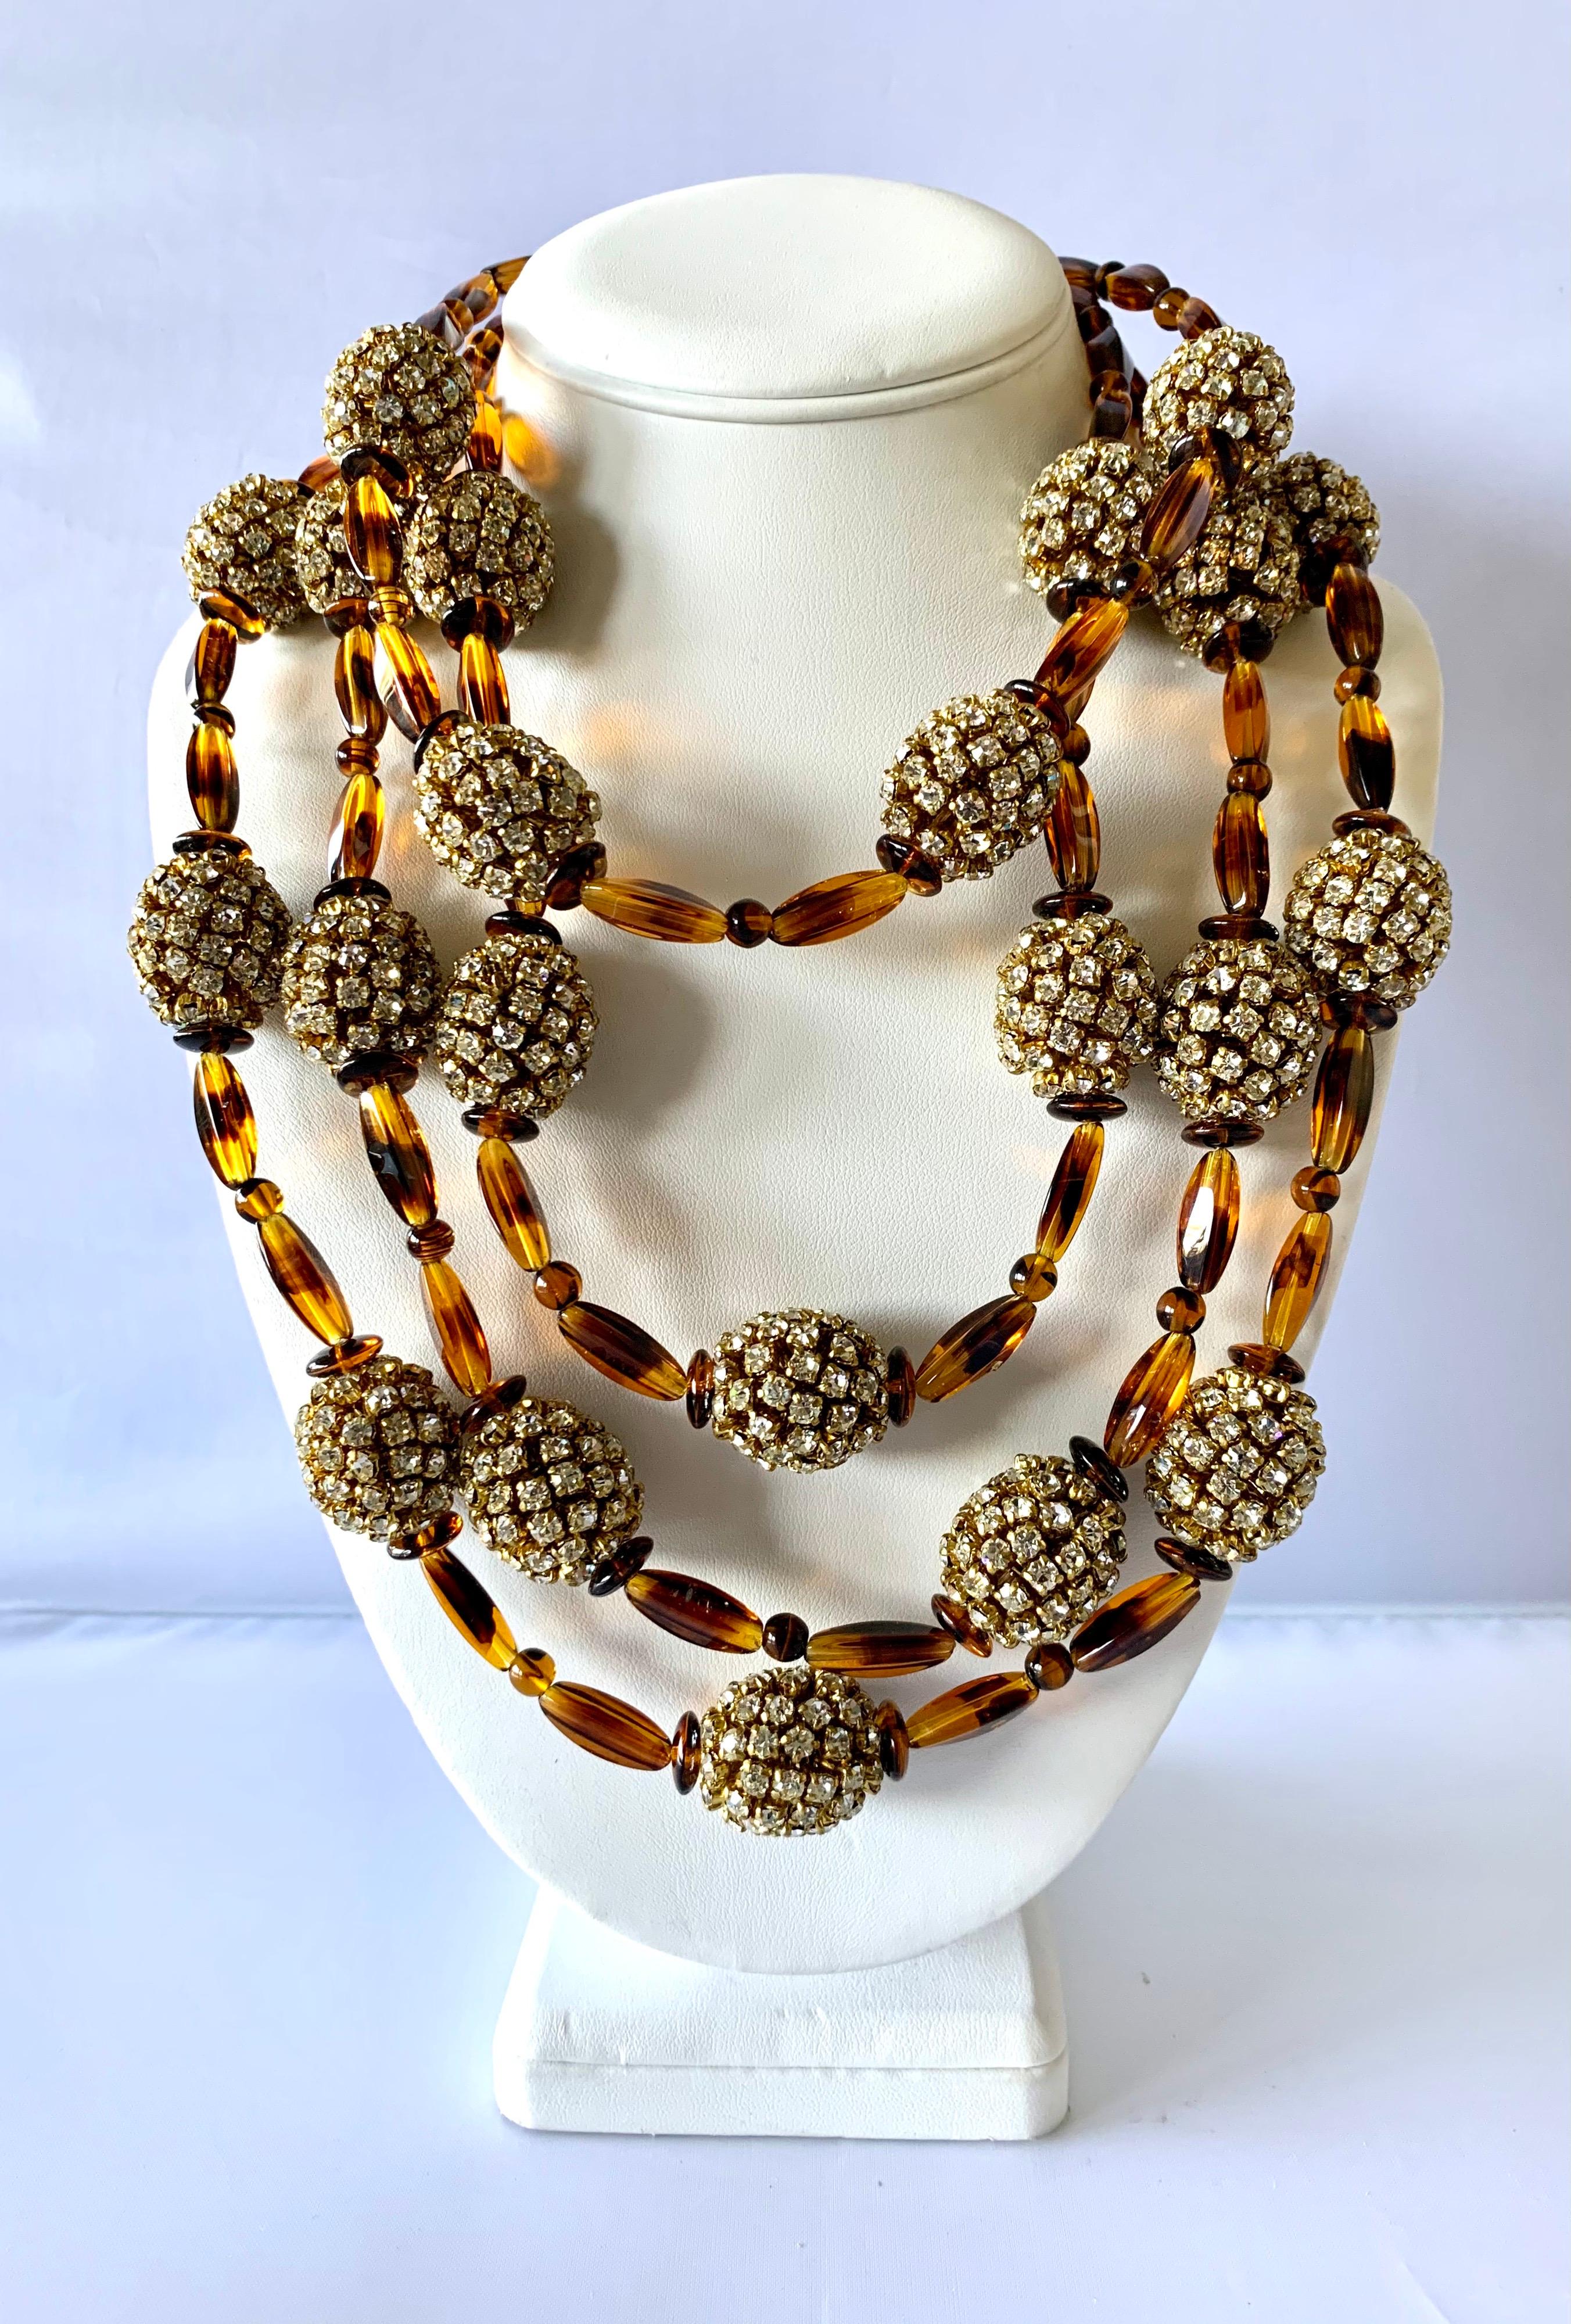 Vintage unique multi-strand statement necklace by William de Lillo for William de Lillo LTD NY. Comprised of four strands of German faux tortoise elongated glass beads which are accented by large gilt metal oval diamante beads - the attention to